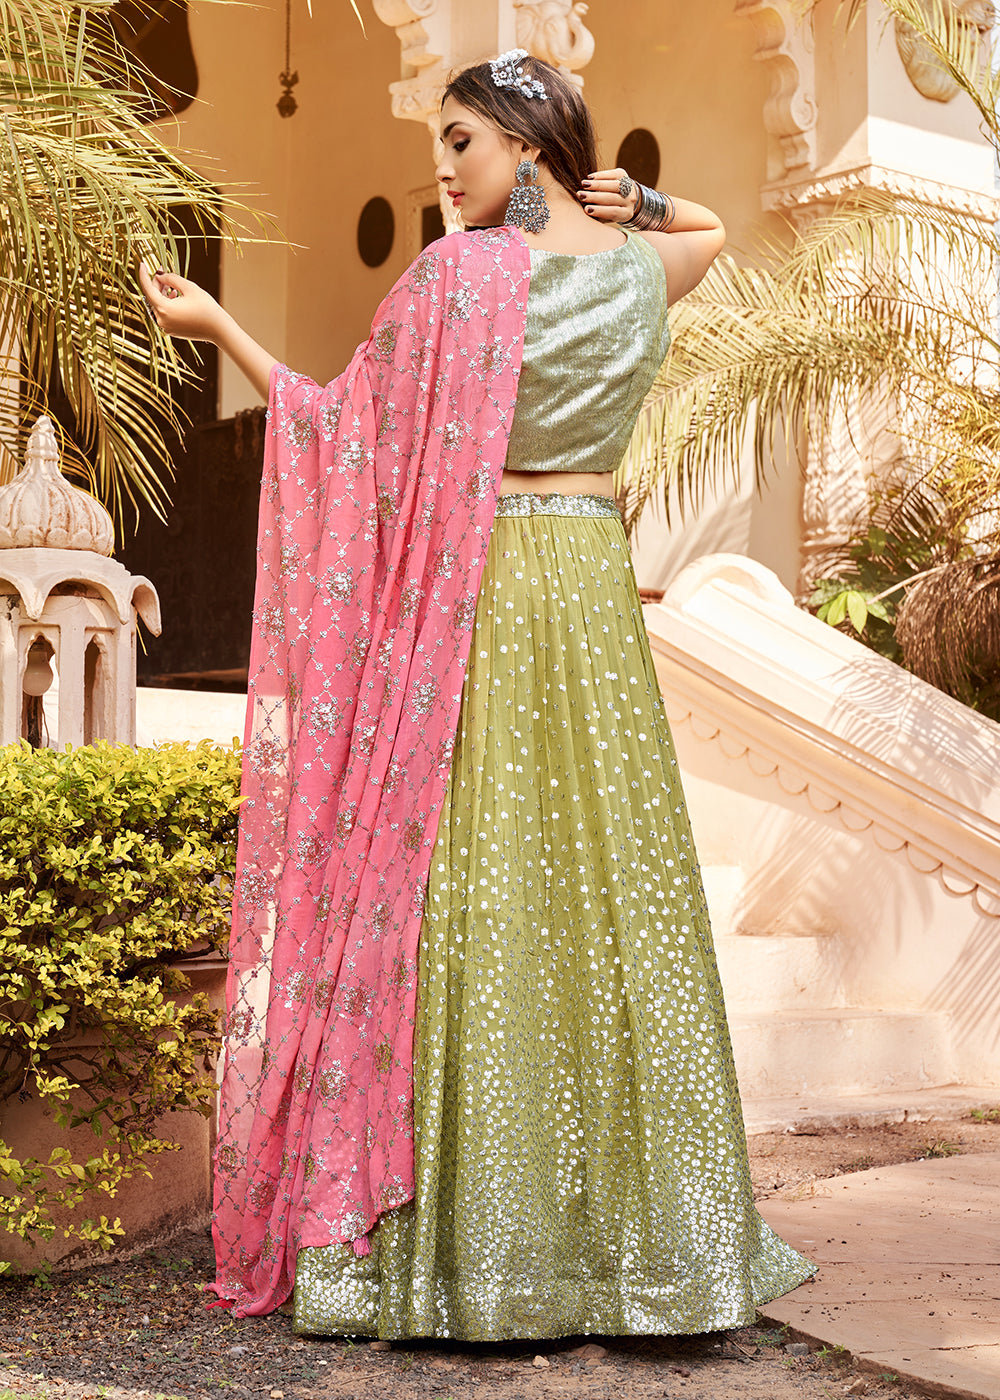 Buy Now Ingenious Pistachio Green Silver Sequins Party Wear Lehenga Choli Online in USA, UK, Canada & Worldwide at Empress Clothing.